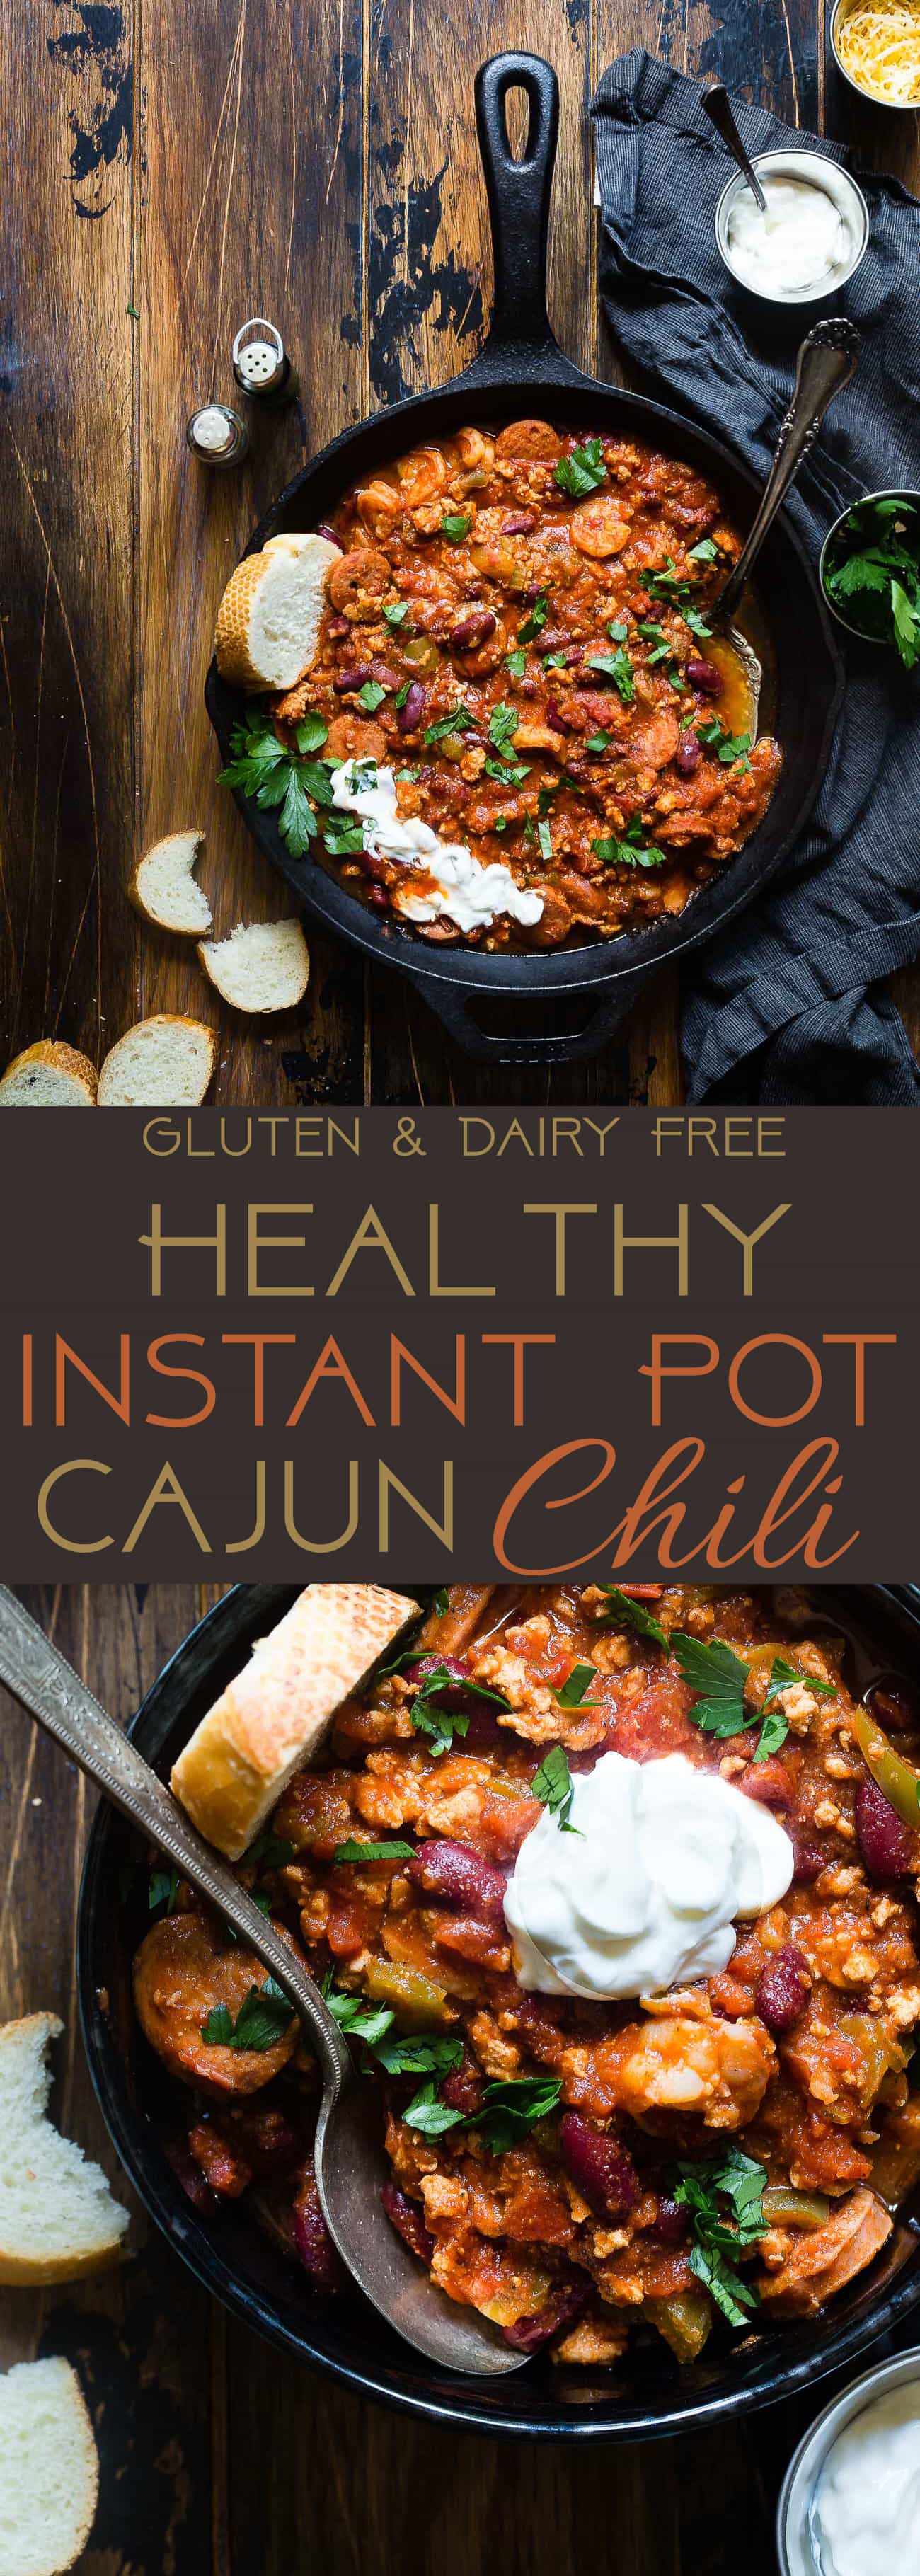 Instant Pot Cajun Chili - This quick and easy, healthy Instant Pot chili, with a little Cajun flair, is sure to become a family favorite! It's dairy/grain/gluten free, makes great leftovers and freezes great! Perfect for meal prep! | Foodfaithfitness.com | @FoodFaithFit | Easy chili recipes. gluten free chili. slow cooker chili. crock pot chili. slow cooker chili recipe. quick and easy chili. healthy chili recipes.